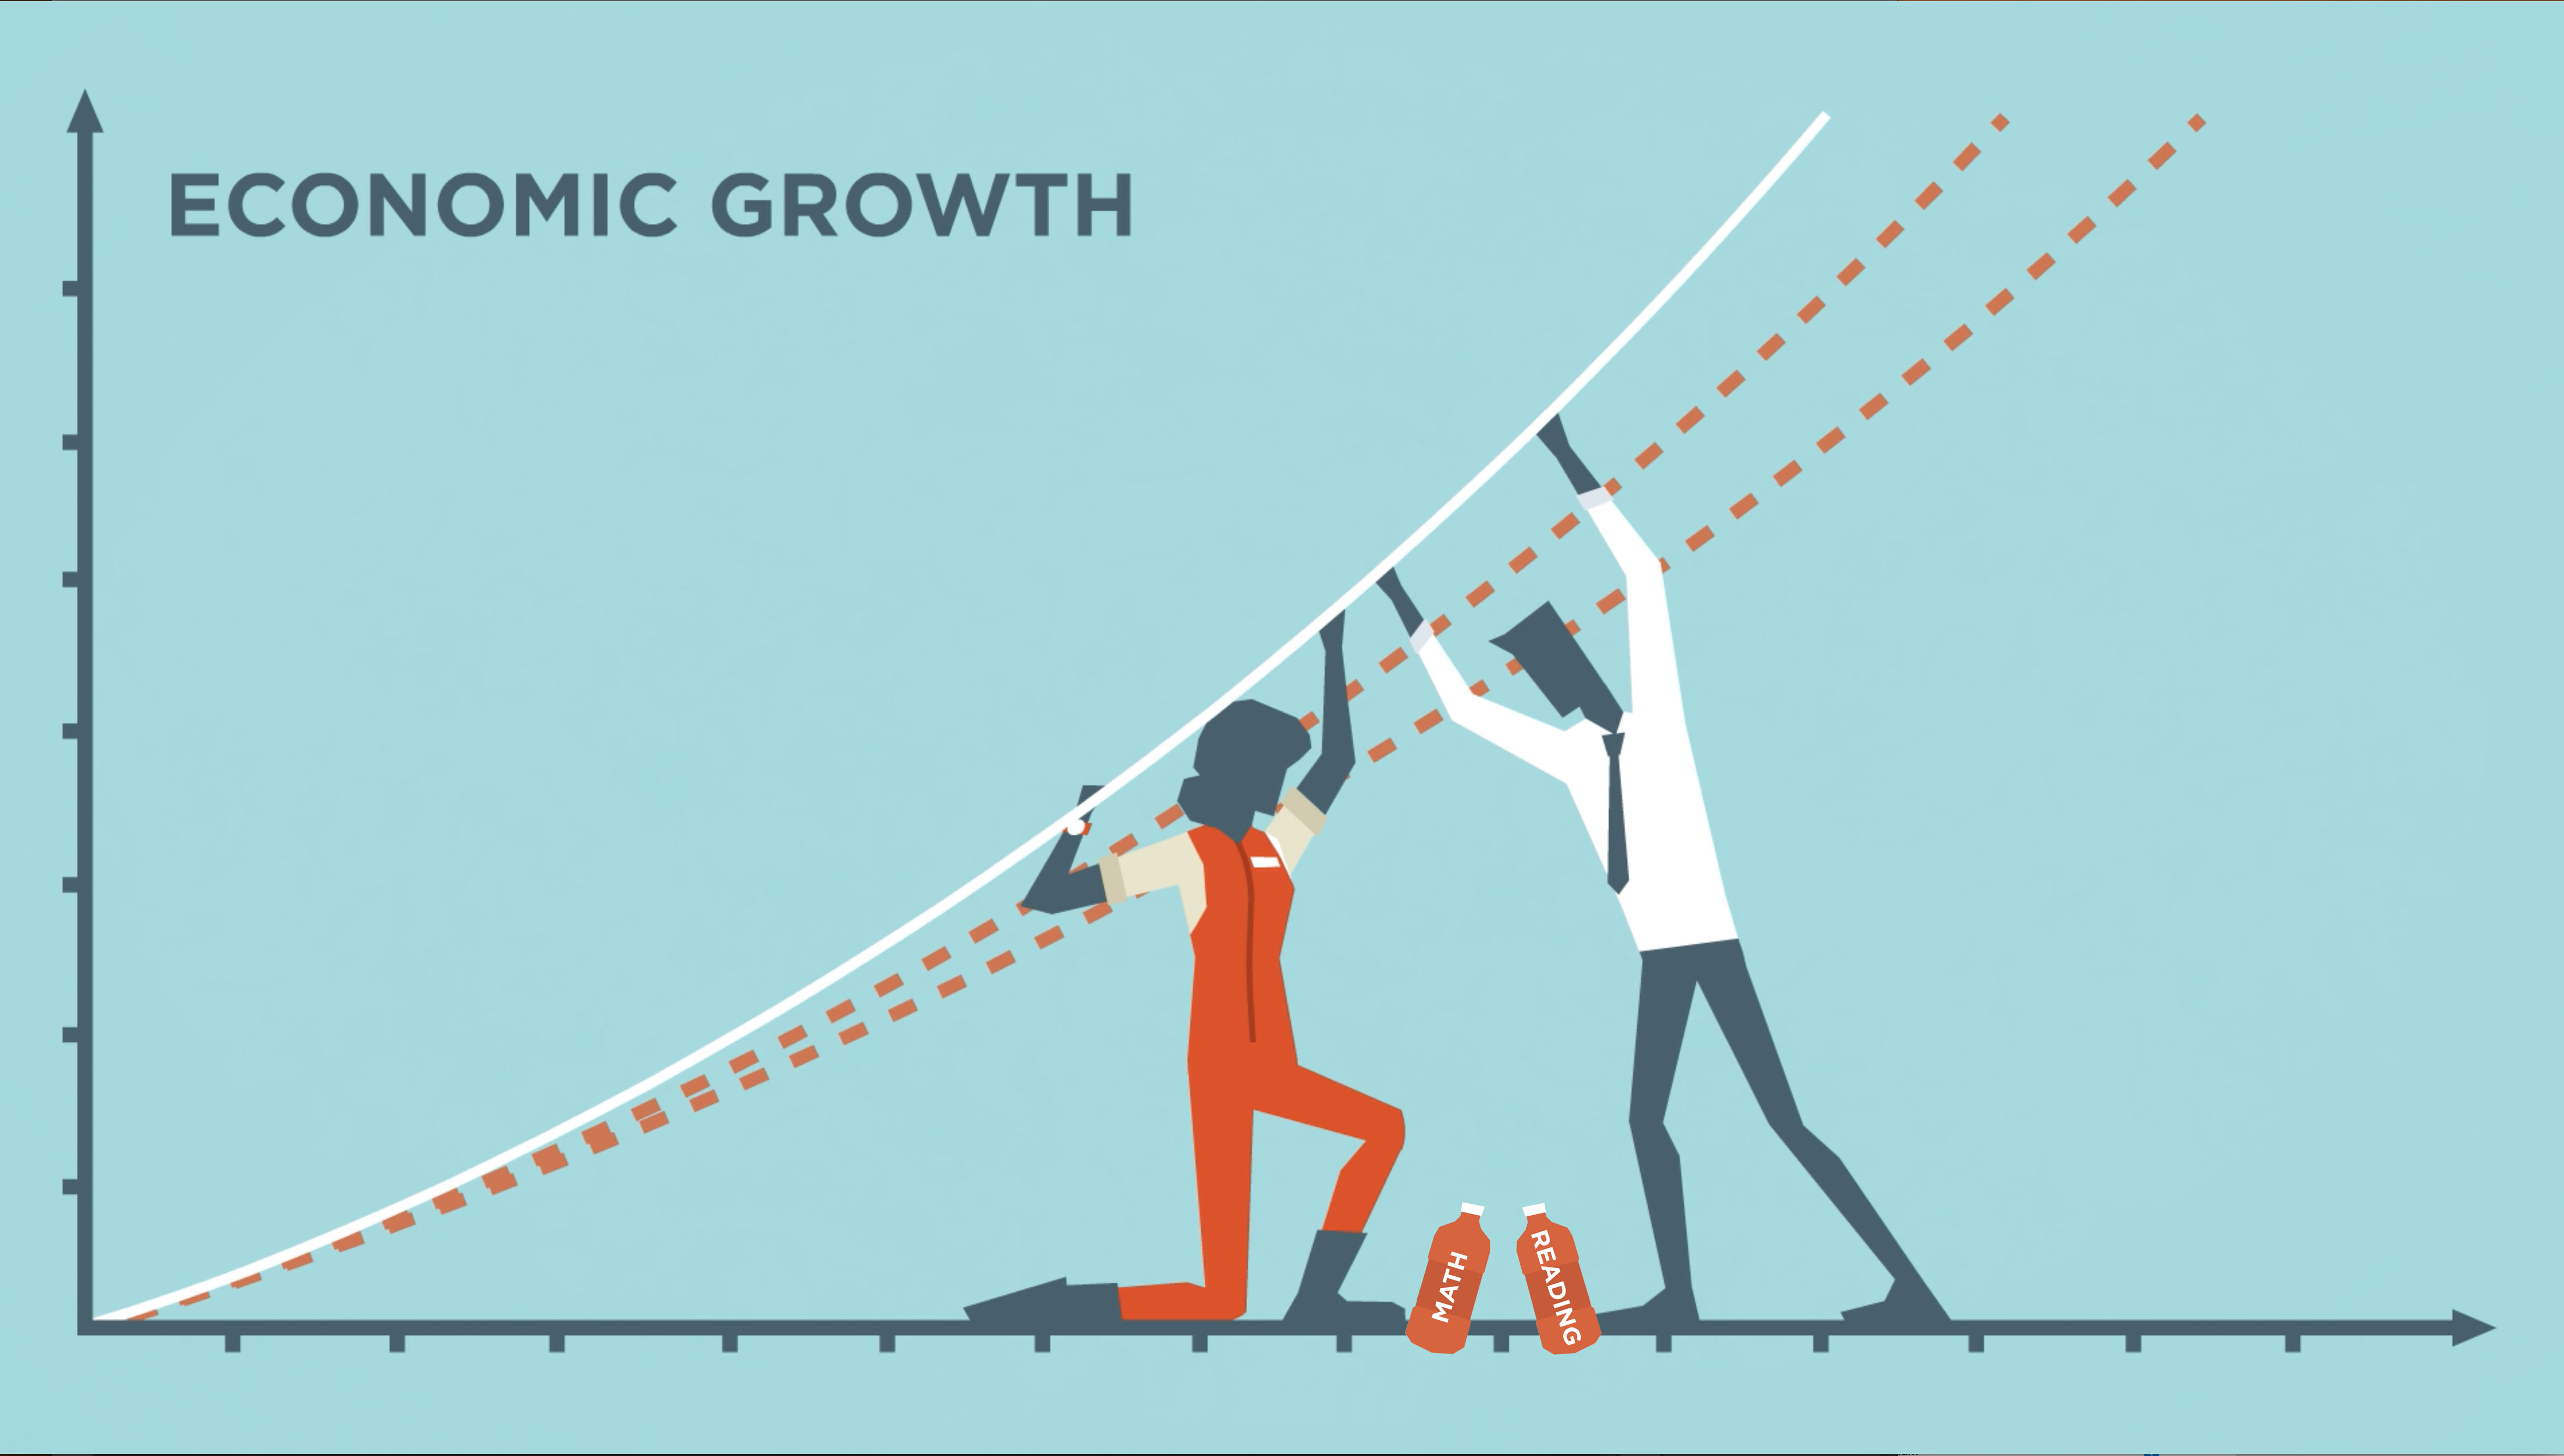 the power of education: boosting economic growth in the long run | policyed